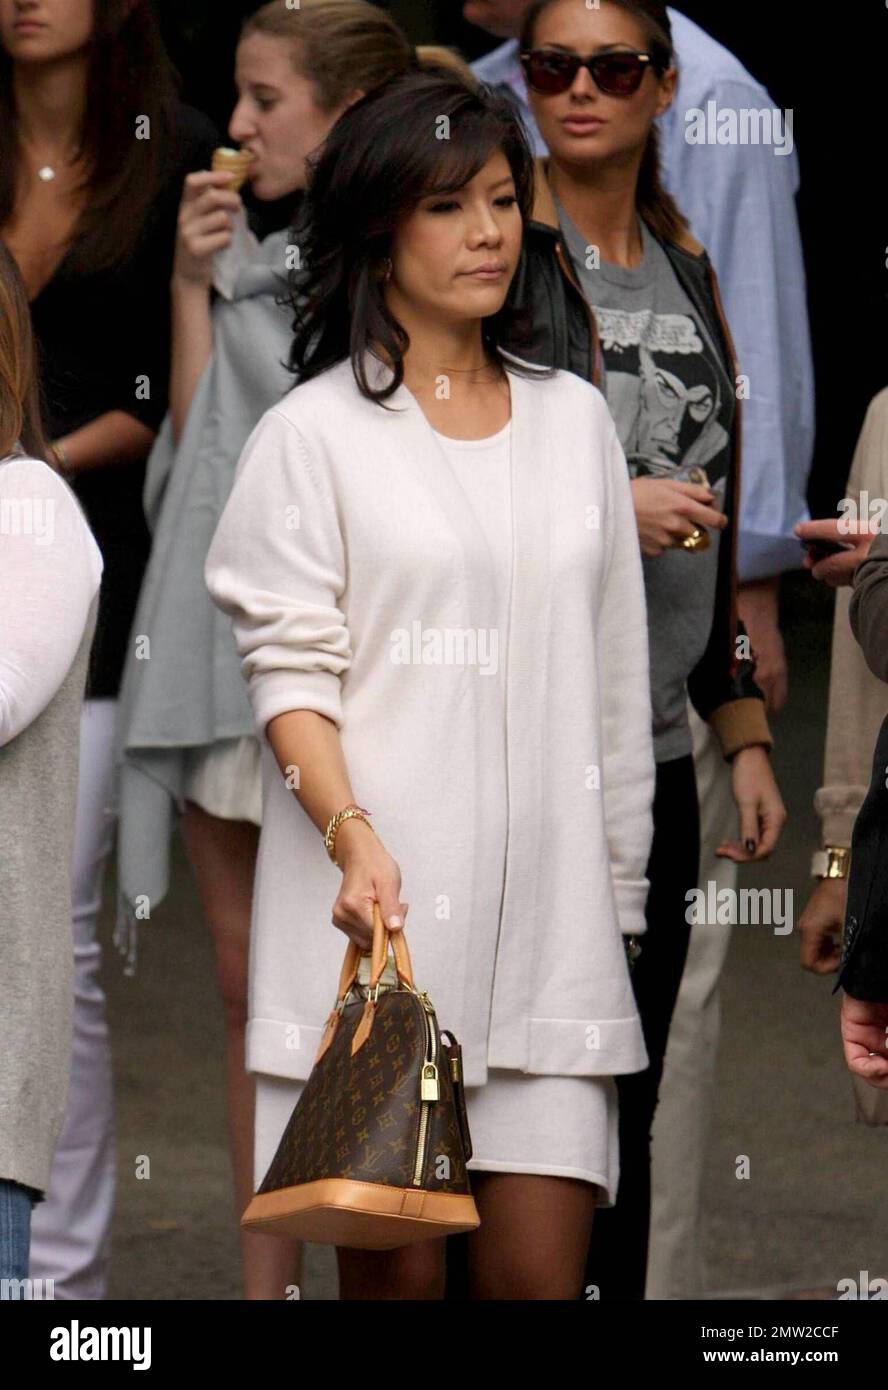 CBS personality Julie Chen and husband and President of CBS Les Moonves leave a private party at Diane Von Furstenberg's residence in Beverly Hills, CA.  2/21/09. Stock Photo